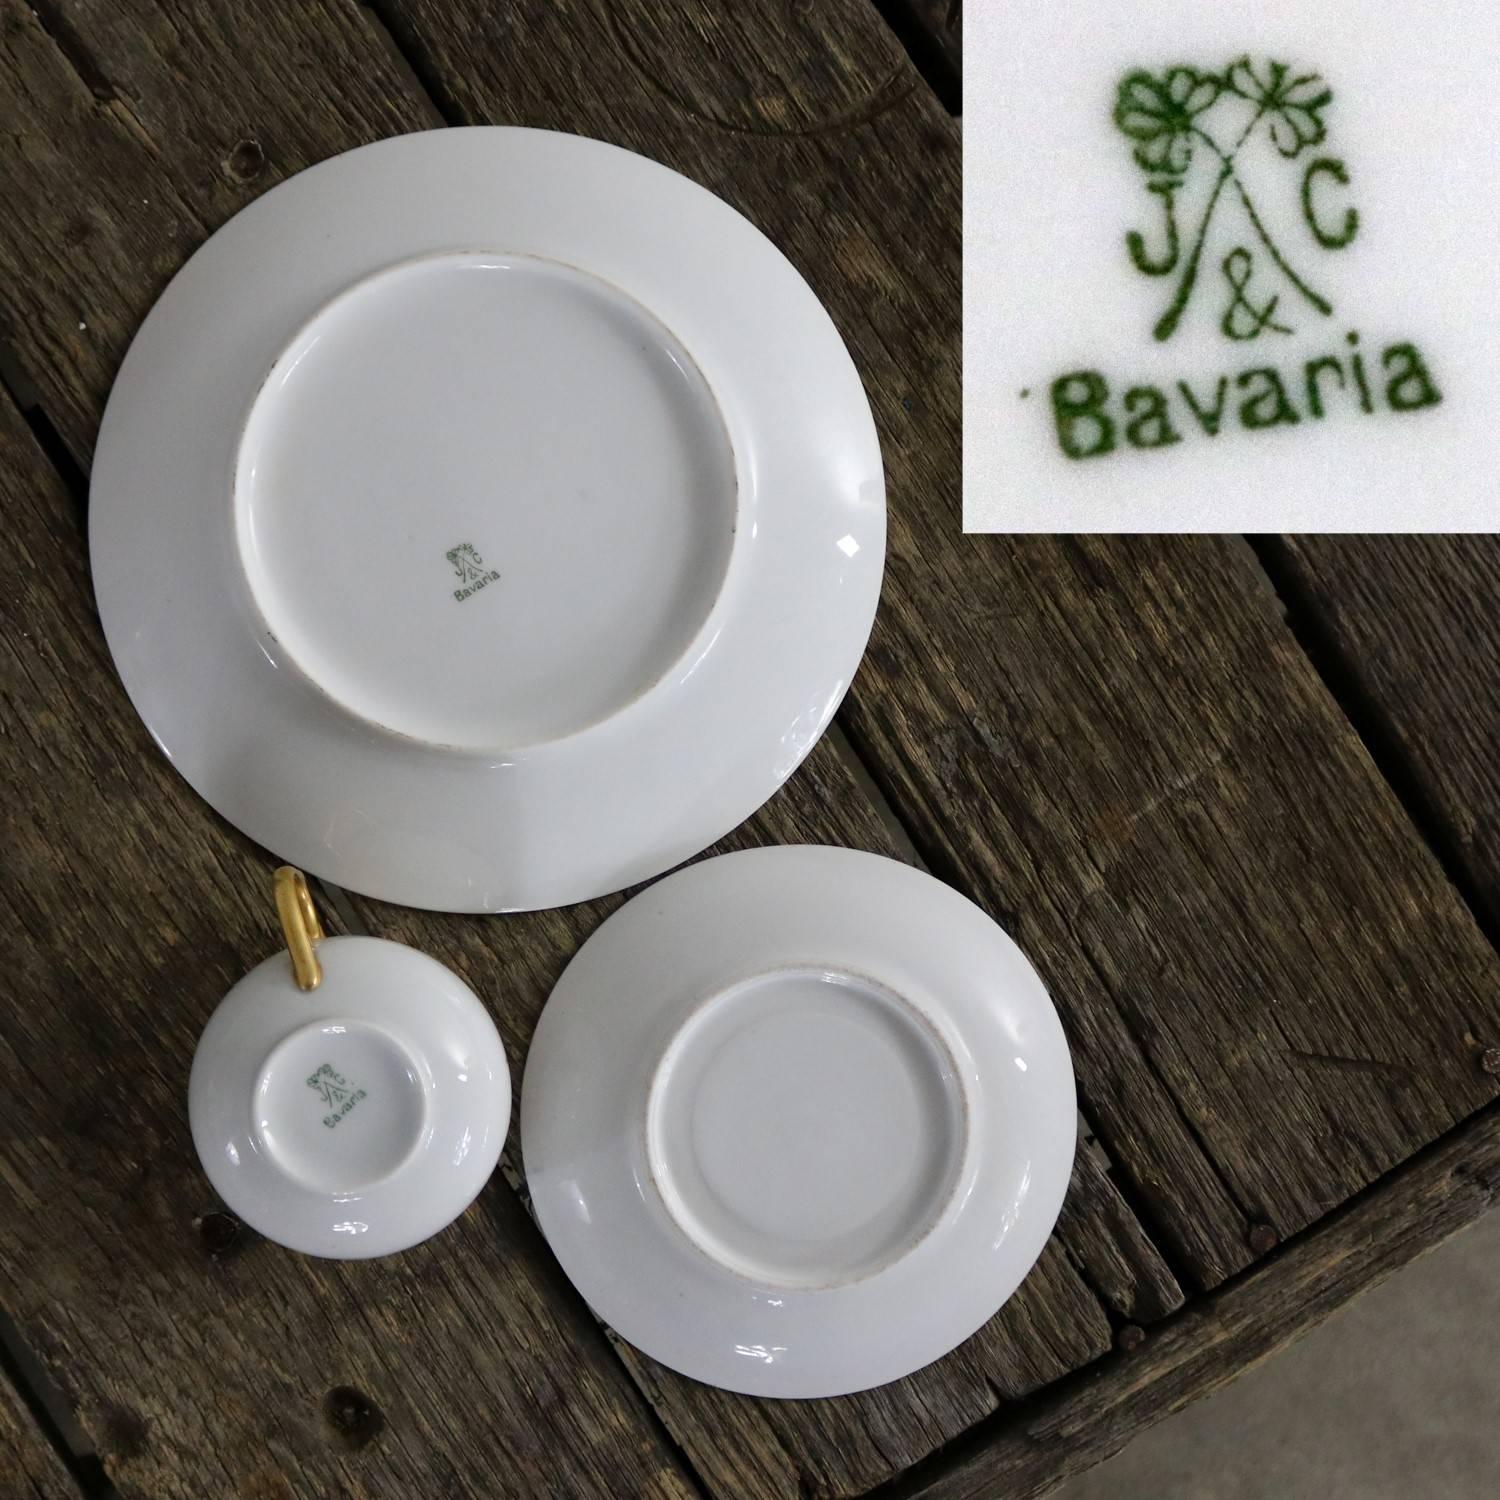 Art Deco J and C Bavaria China Luncheon, Set for Four 1